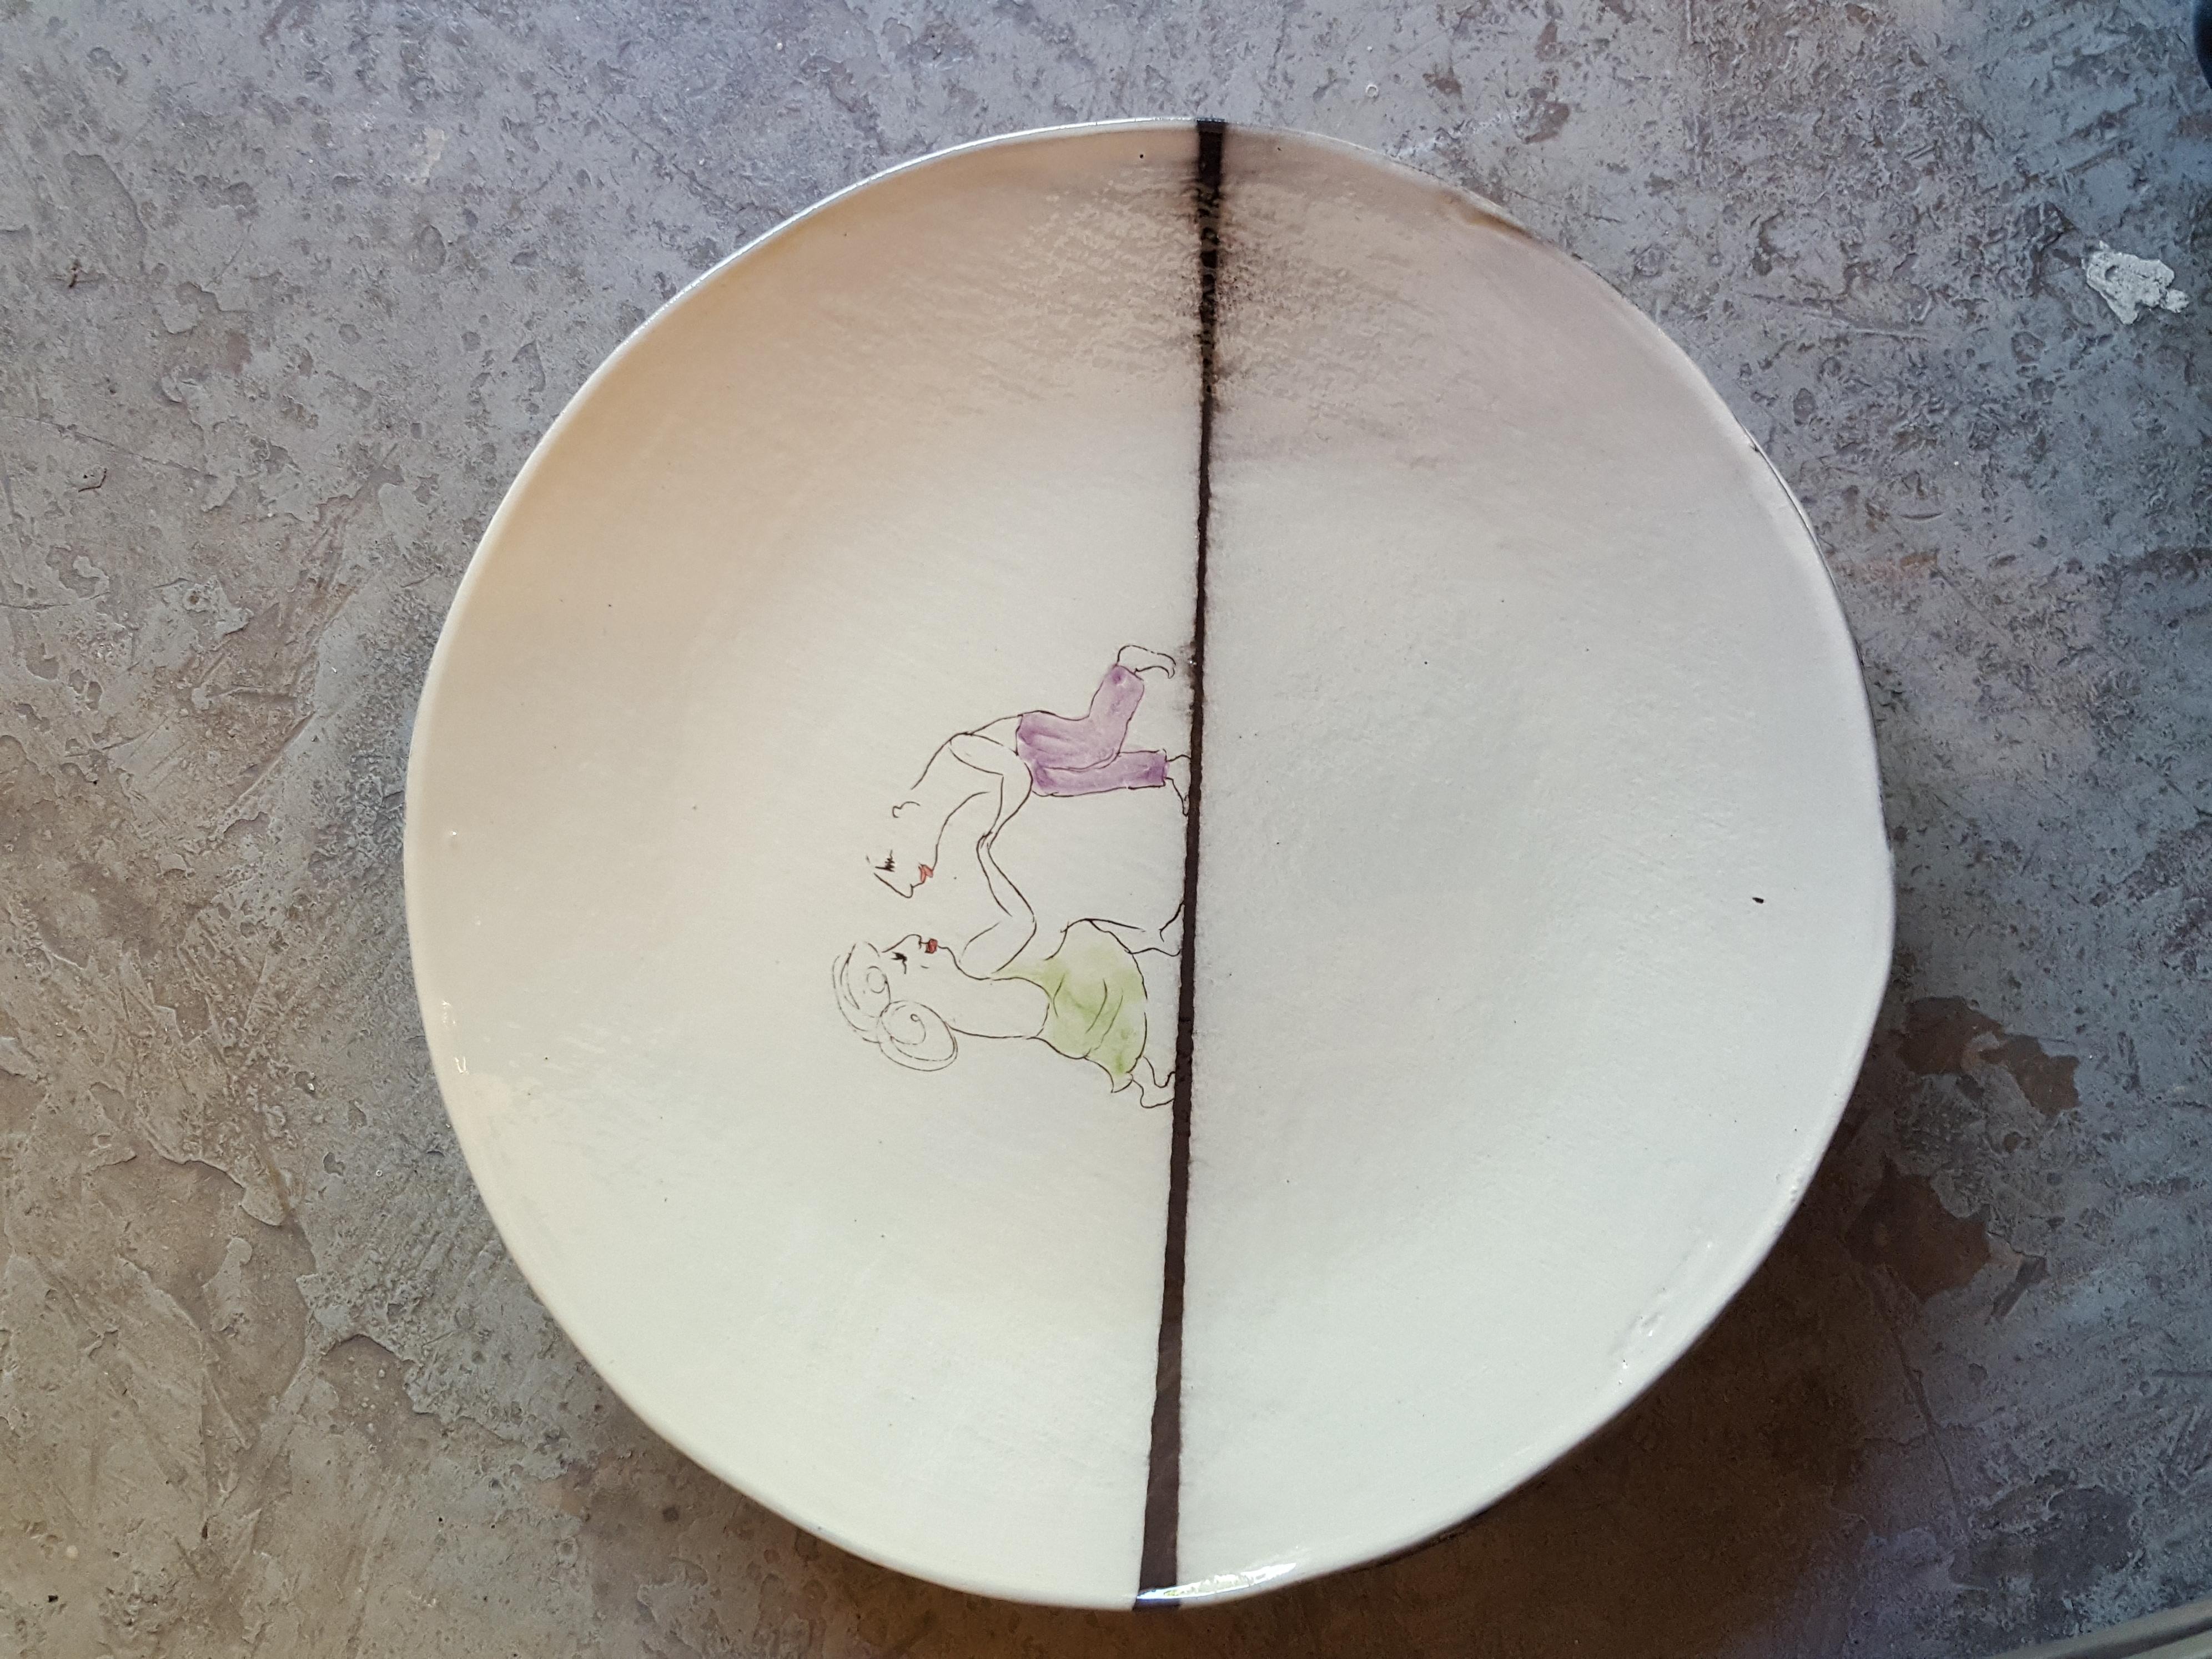 Painted Unique French Artist's Ceramic Dinner Plates